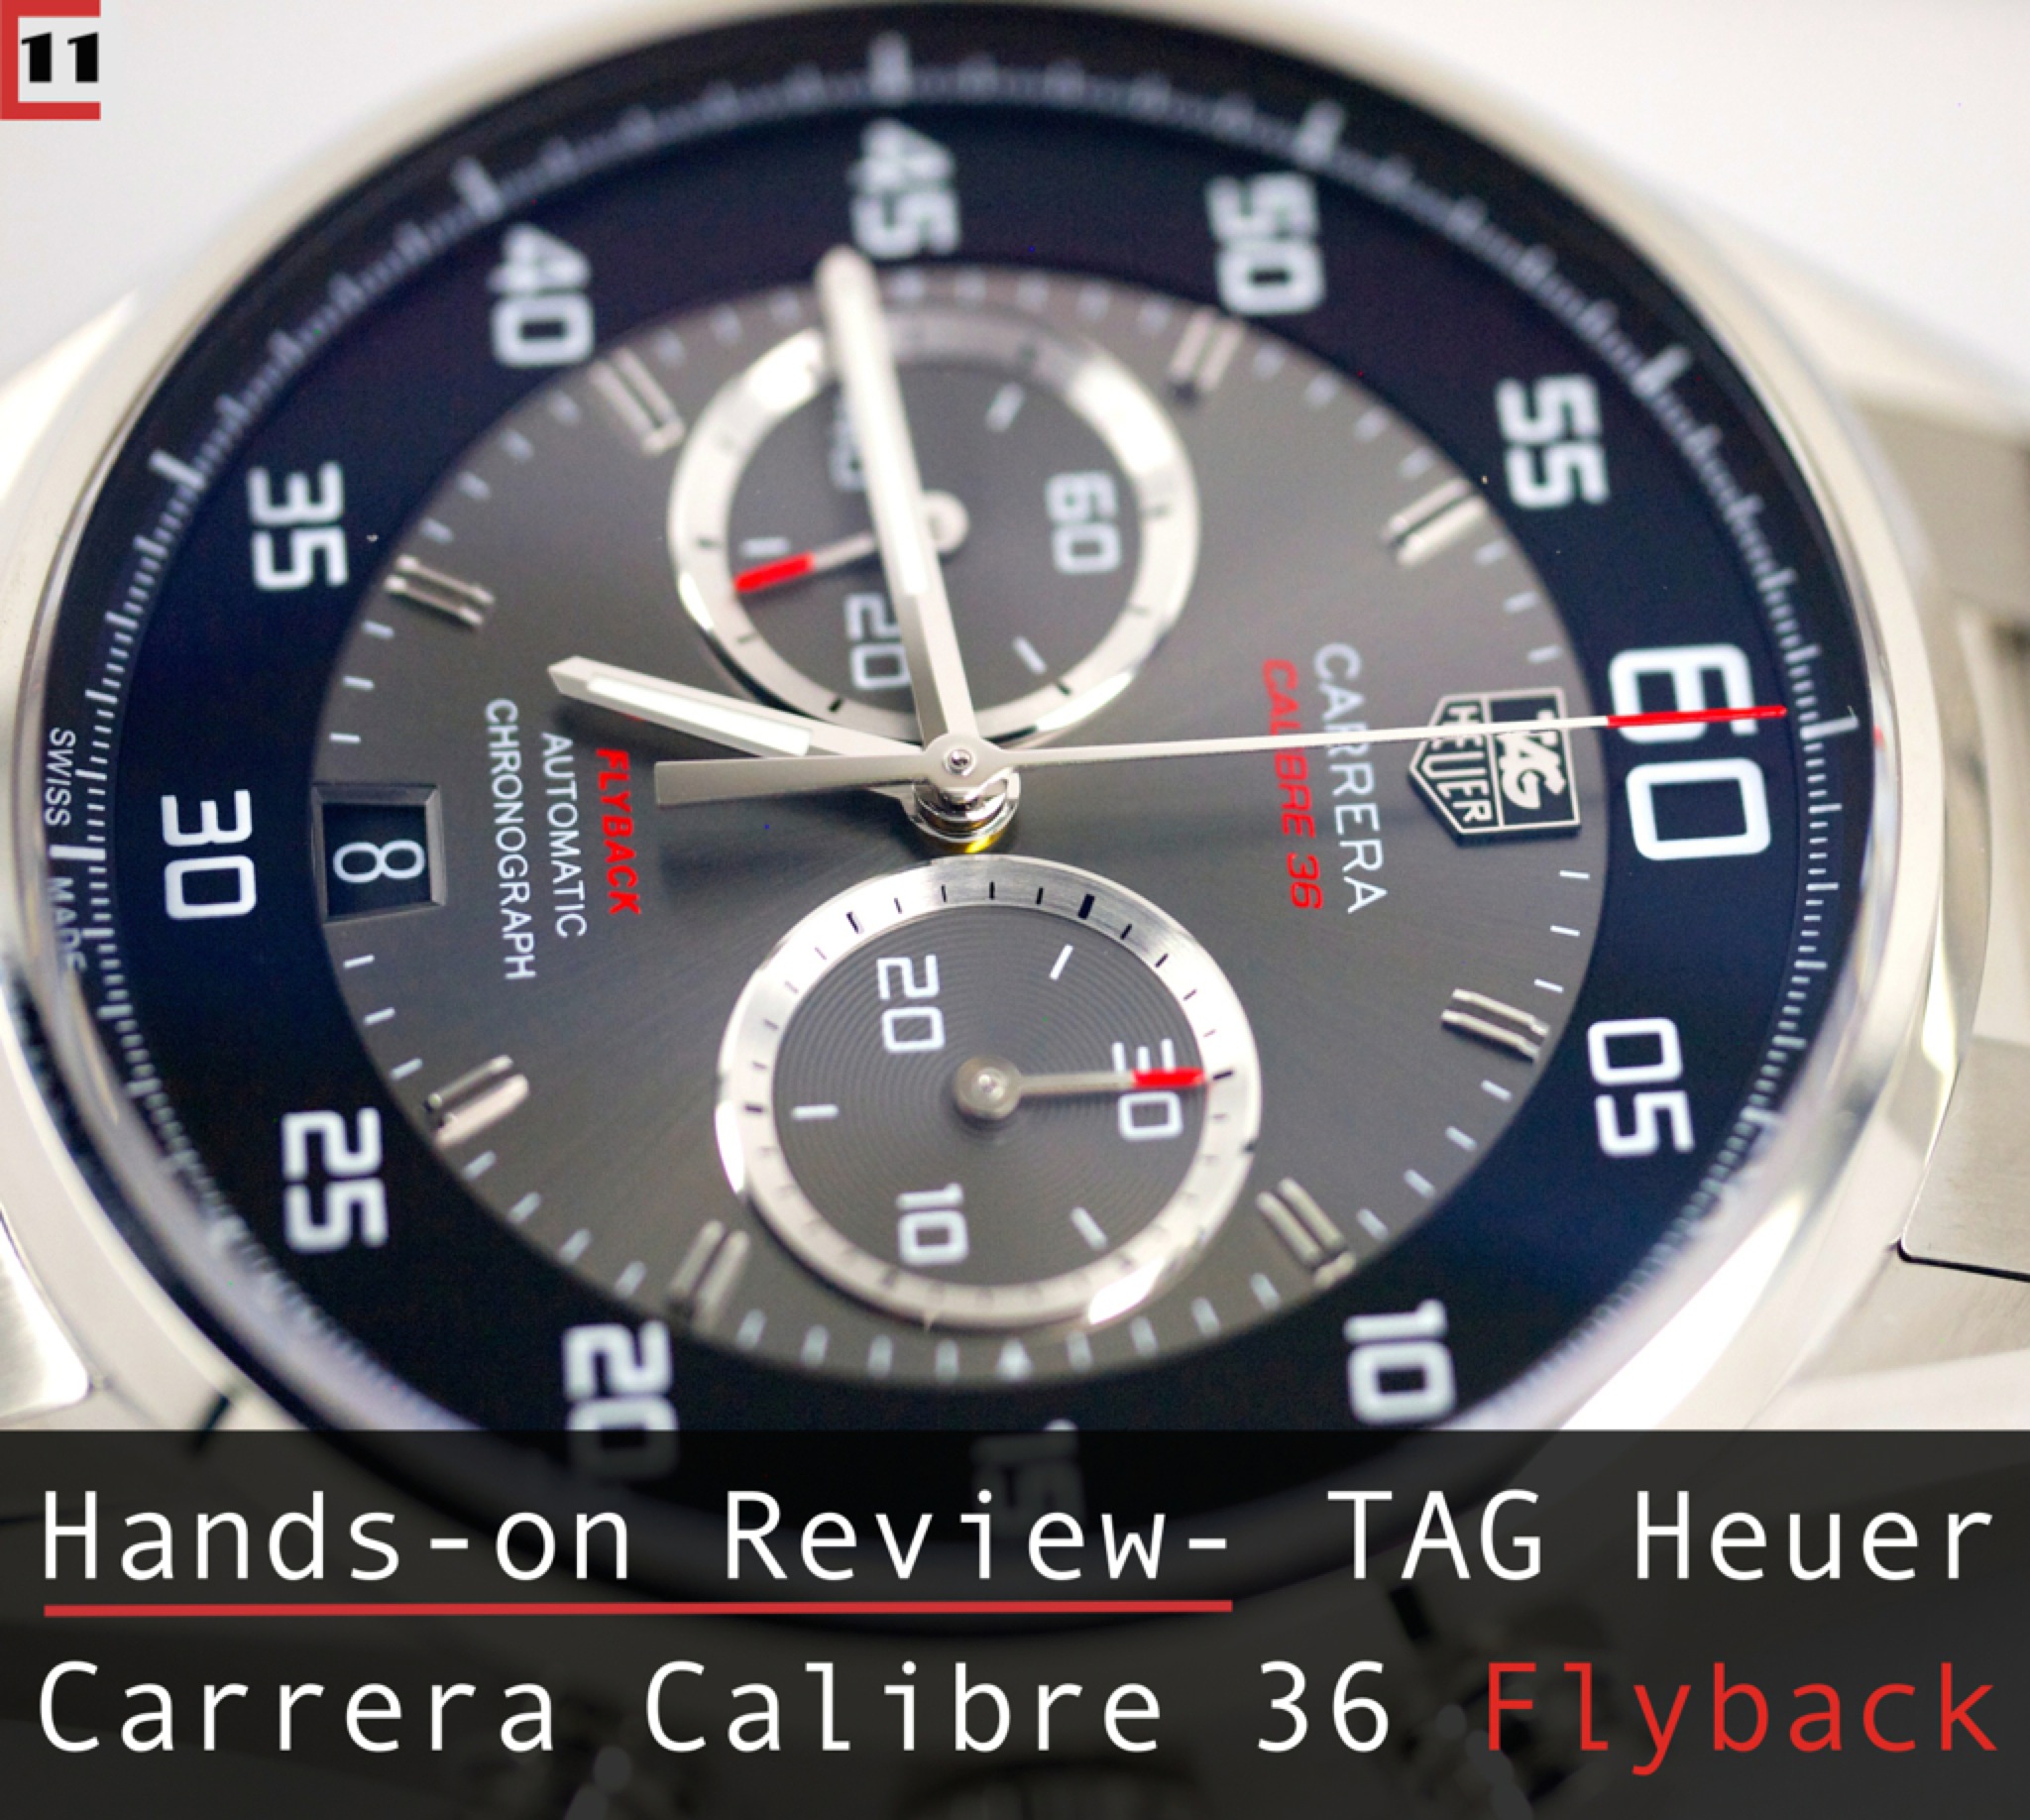 Review- TAG Heuer Carrera Calibre 36 Flyback